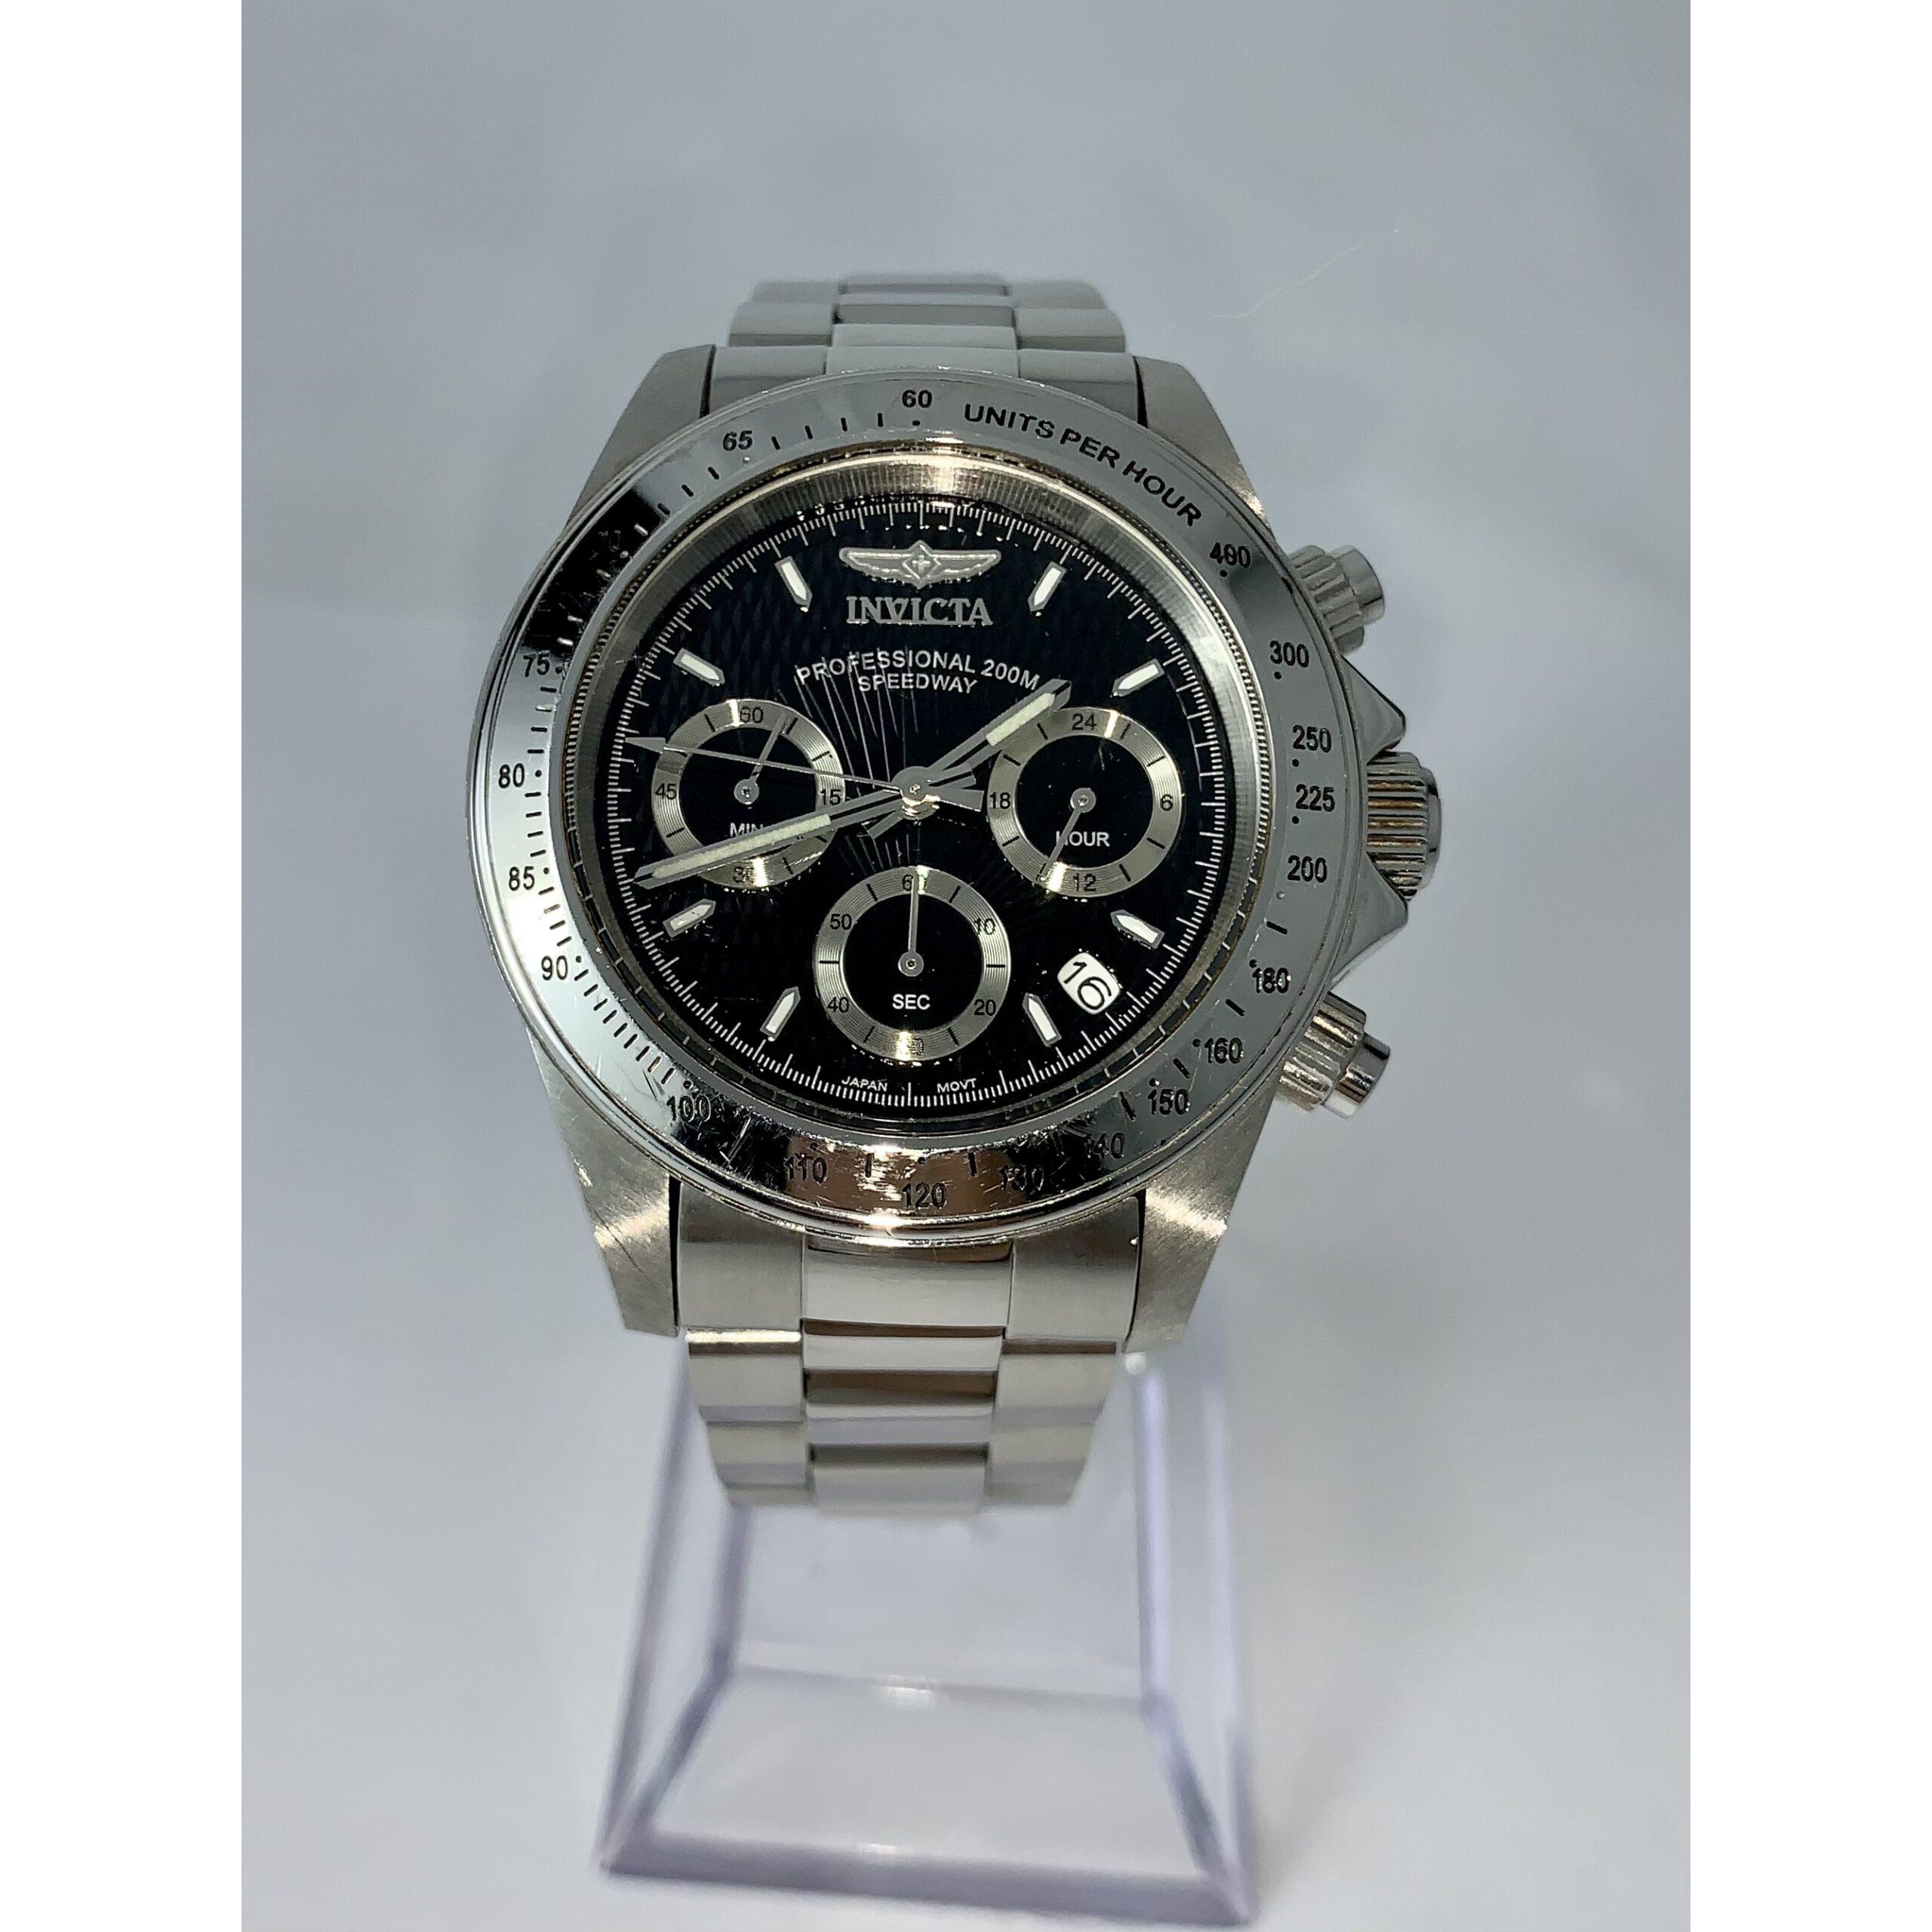 Invicta Professional Speedway Chronograph Stainless Steel Watch 9223 Barry's Pawn and